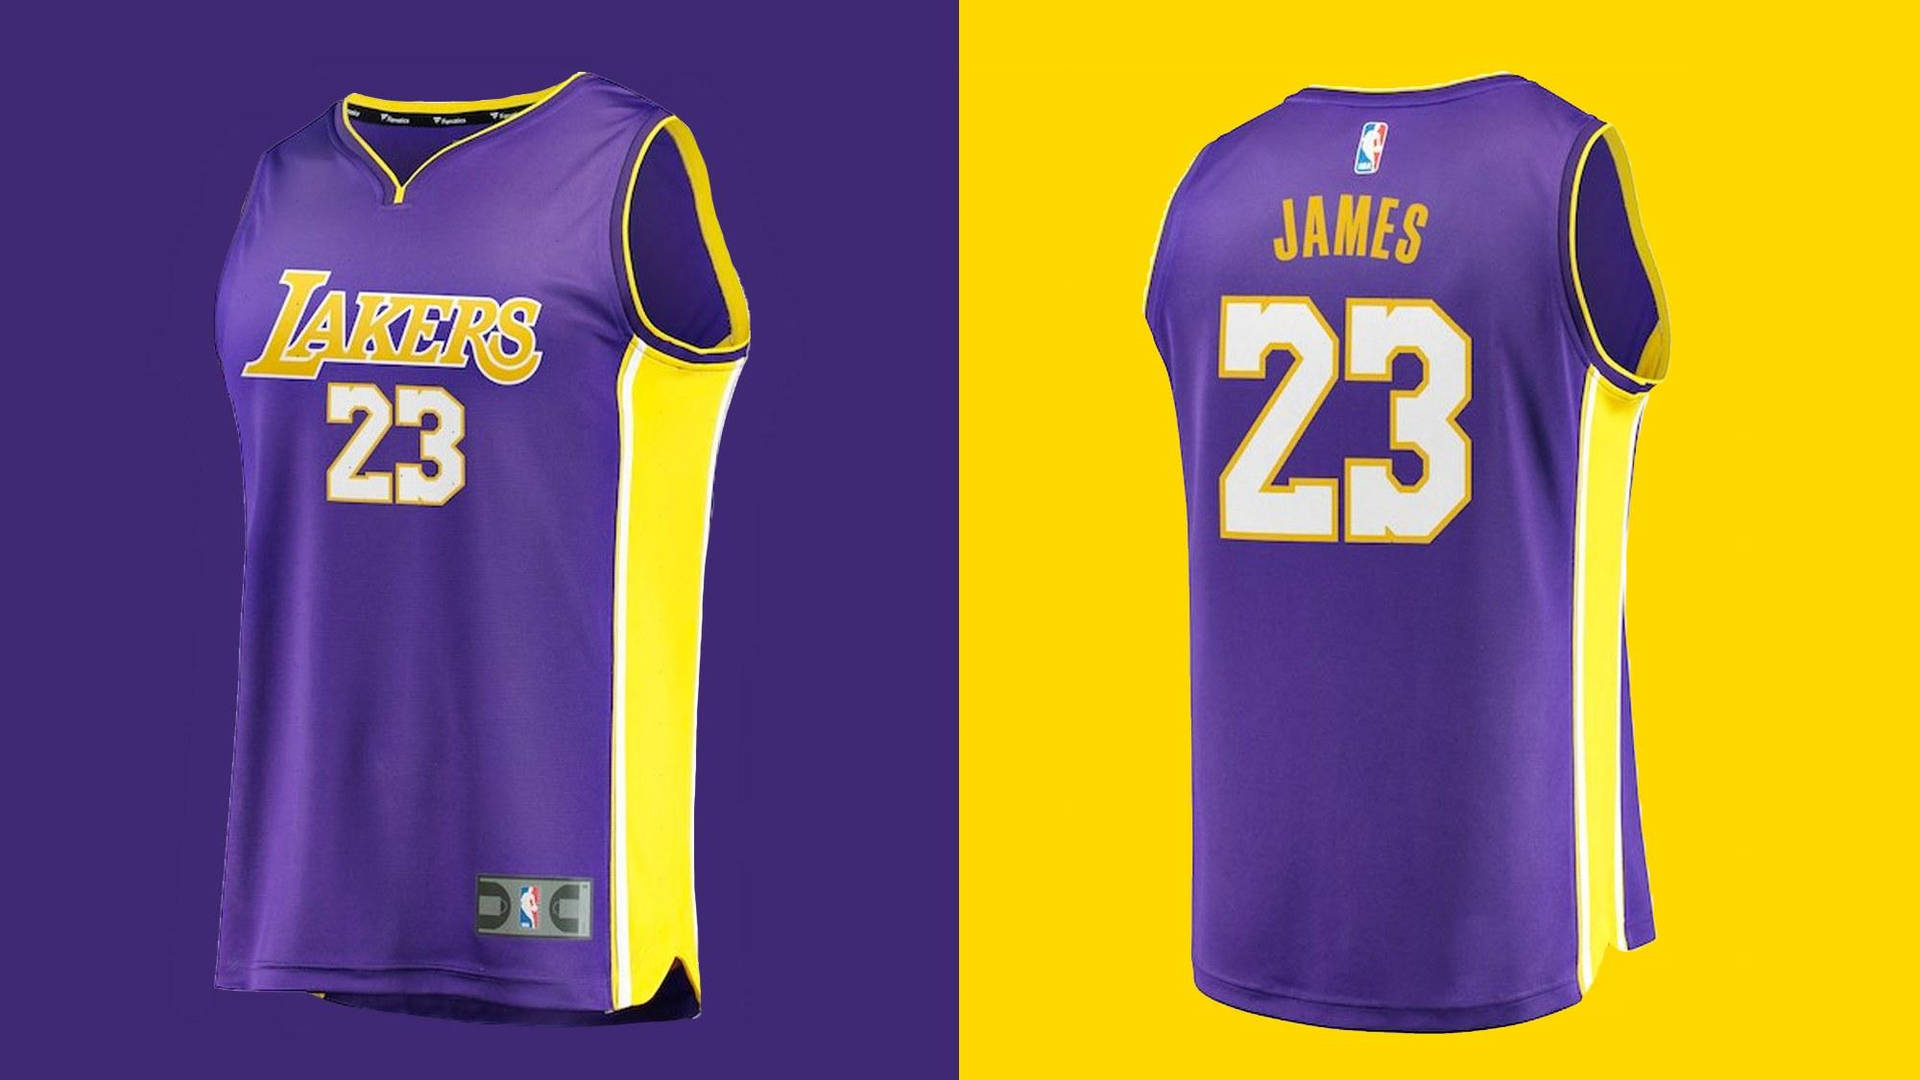 Lebron James Lakers 23 Jersey Only Background